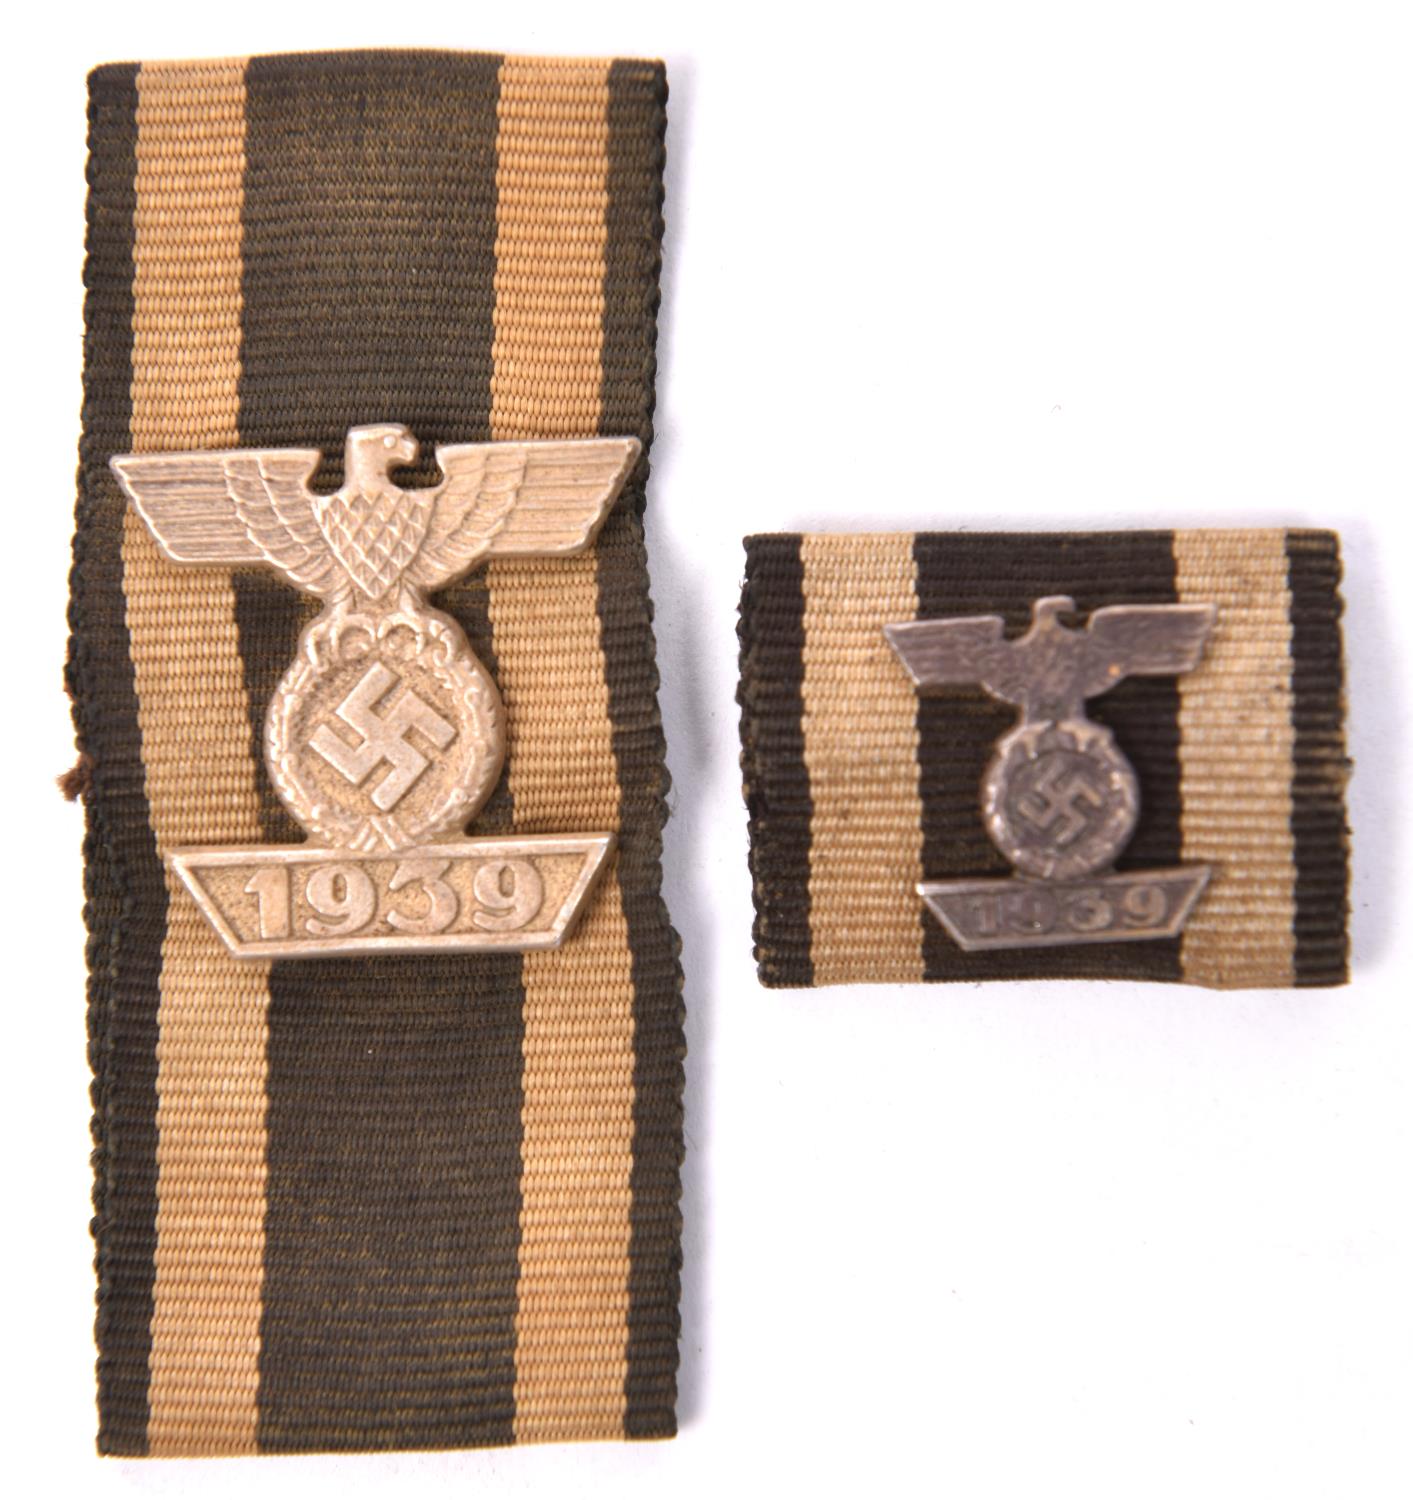 A 1939 bar to the 1914 Iron Cross 2nd class, mounted on a length of very faded ribbon; and a similar